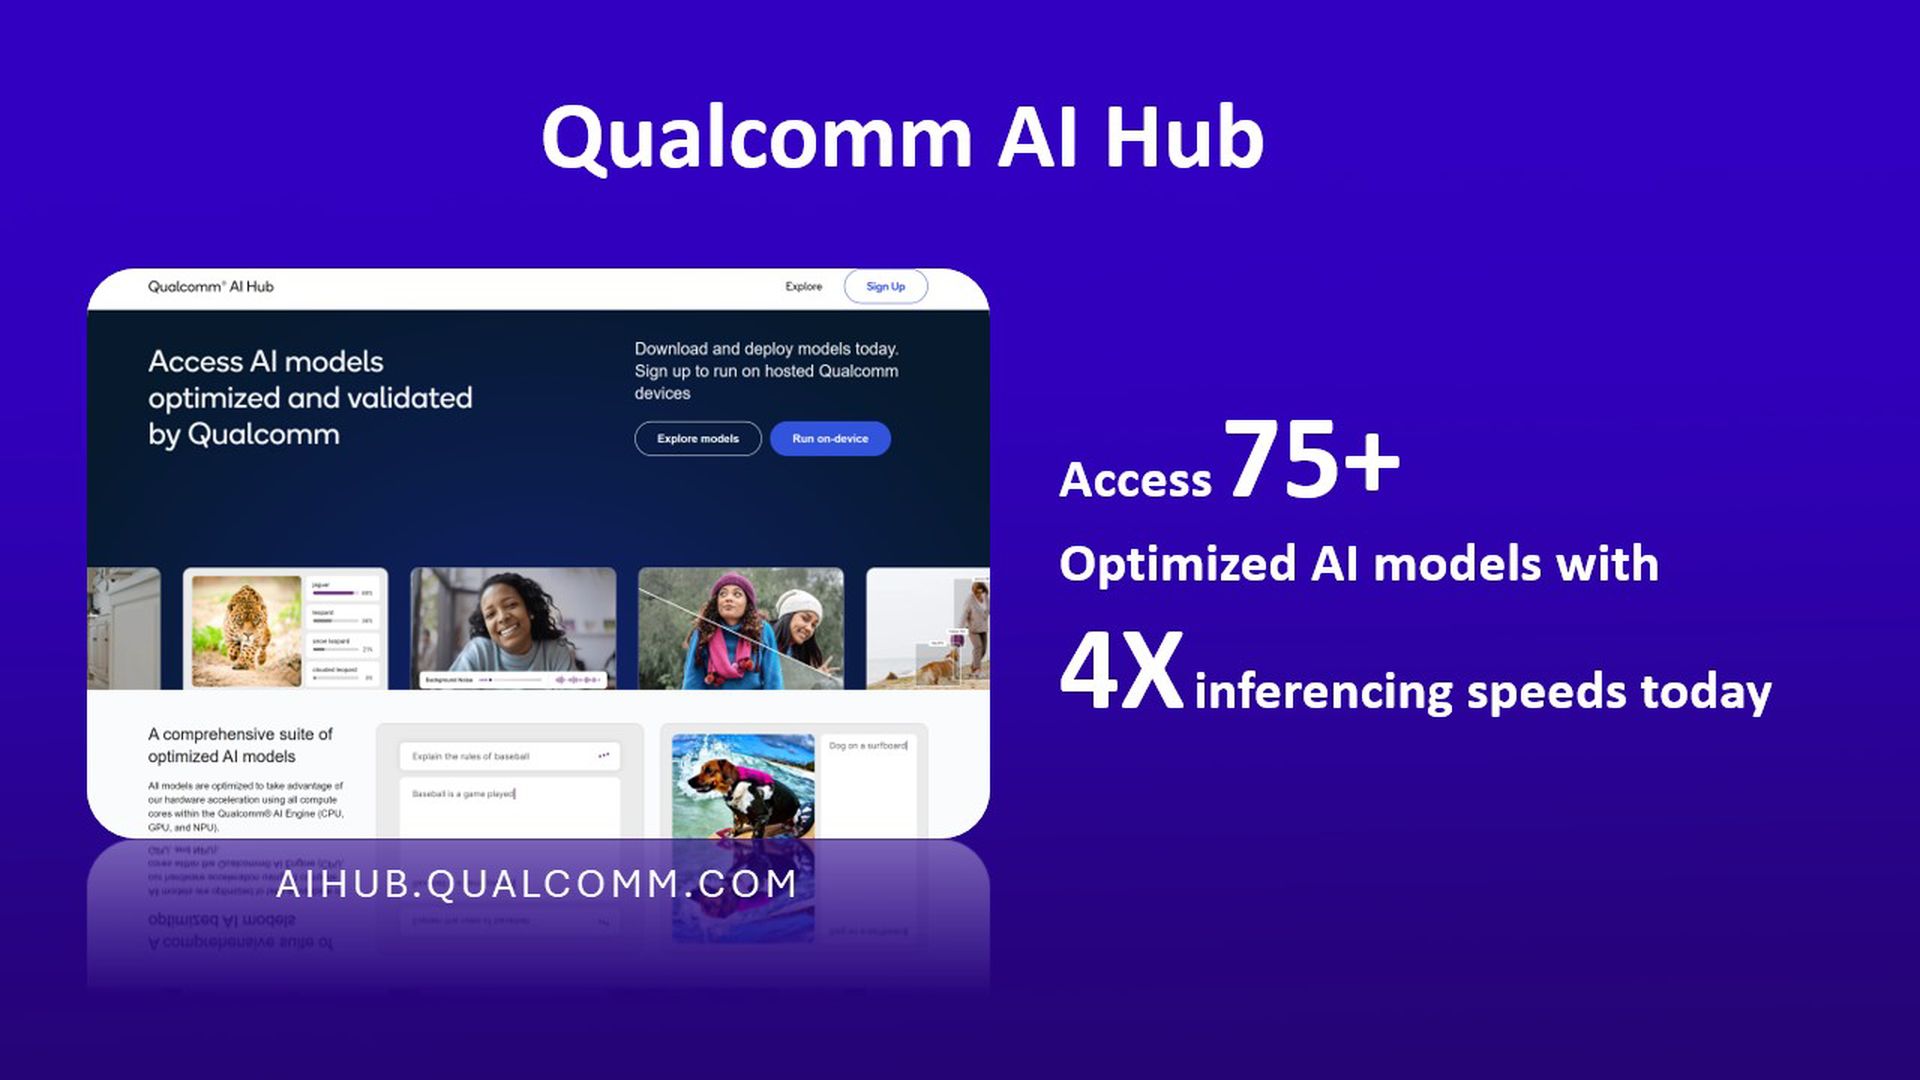 Qualcomm's artificial intelligence dreams are unparalleled